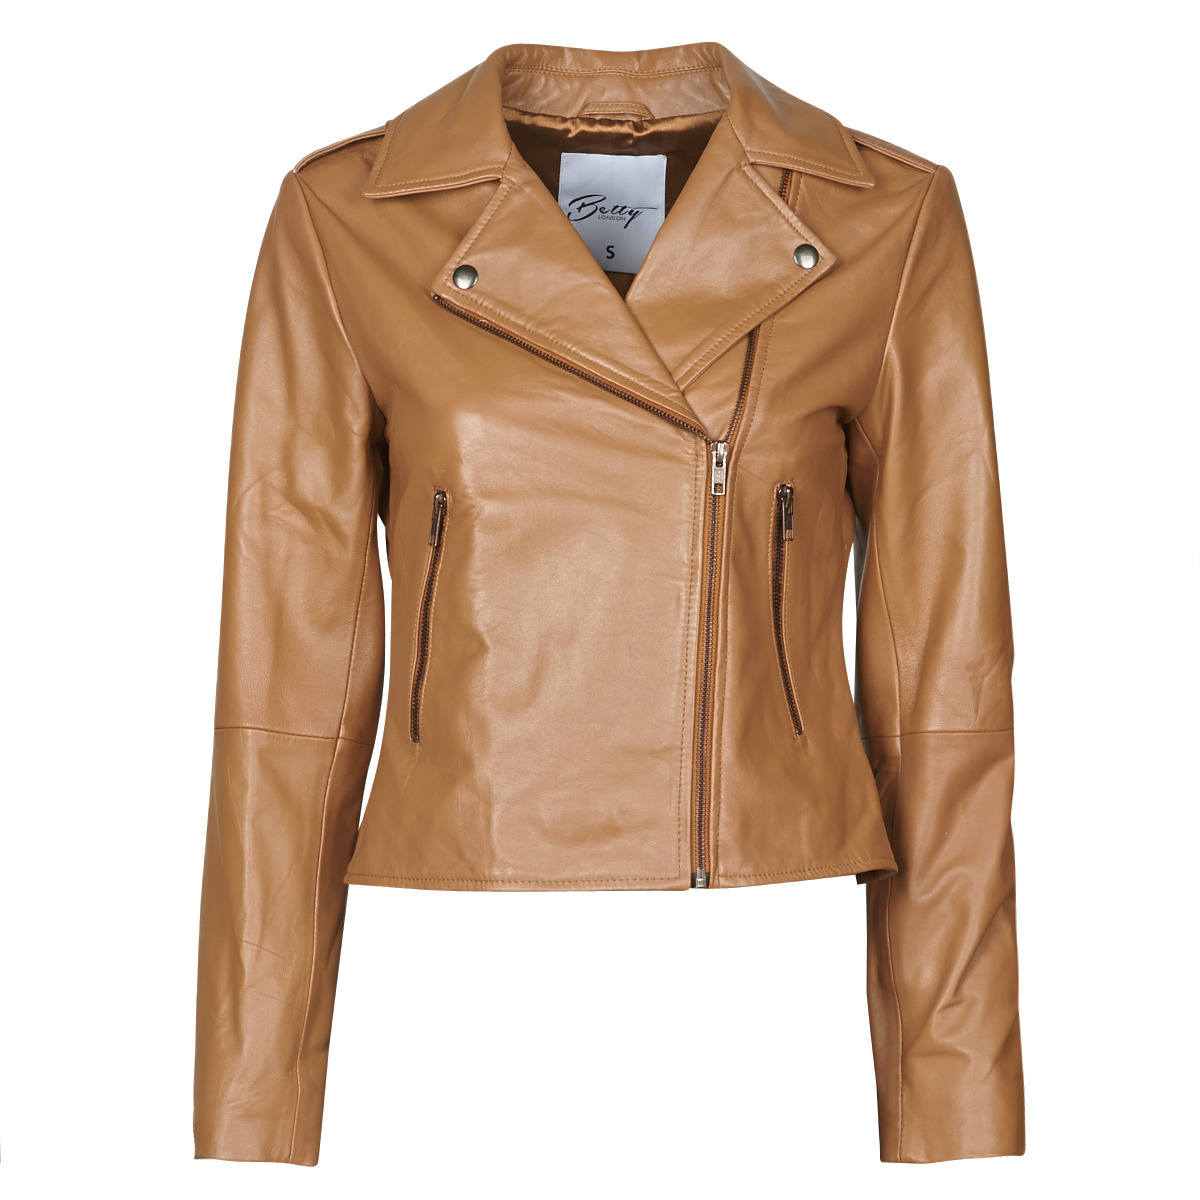 Betty London Women's Brown Leather Jacket by Spartoo GOOFASH